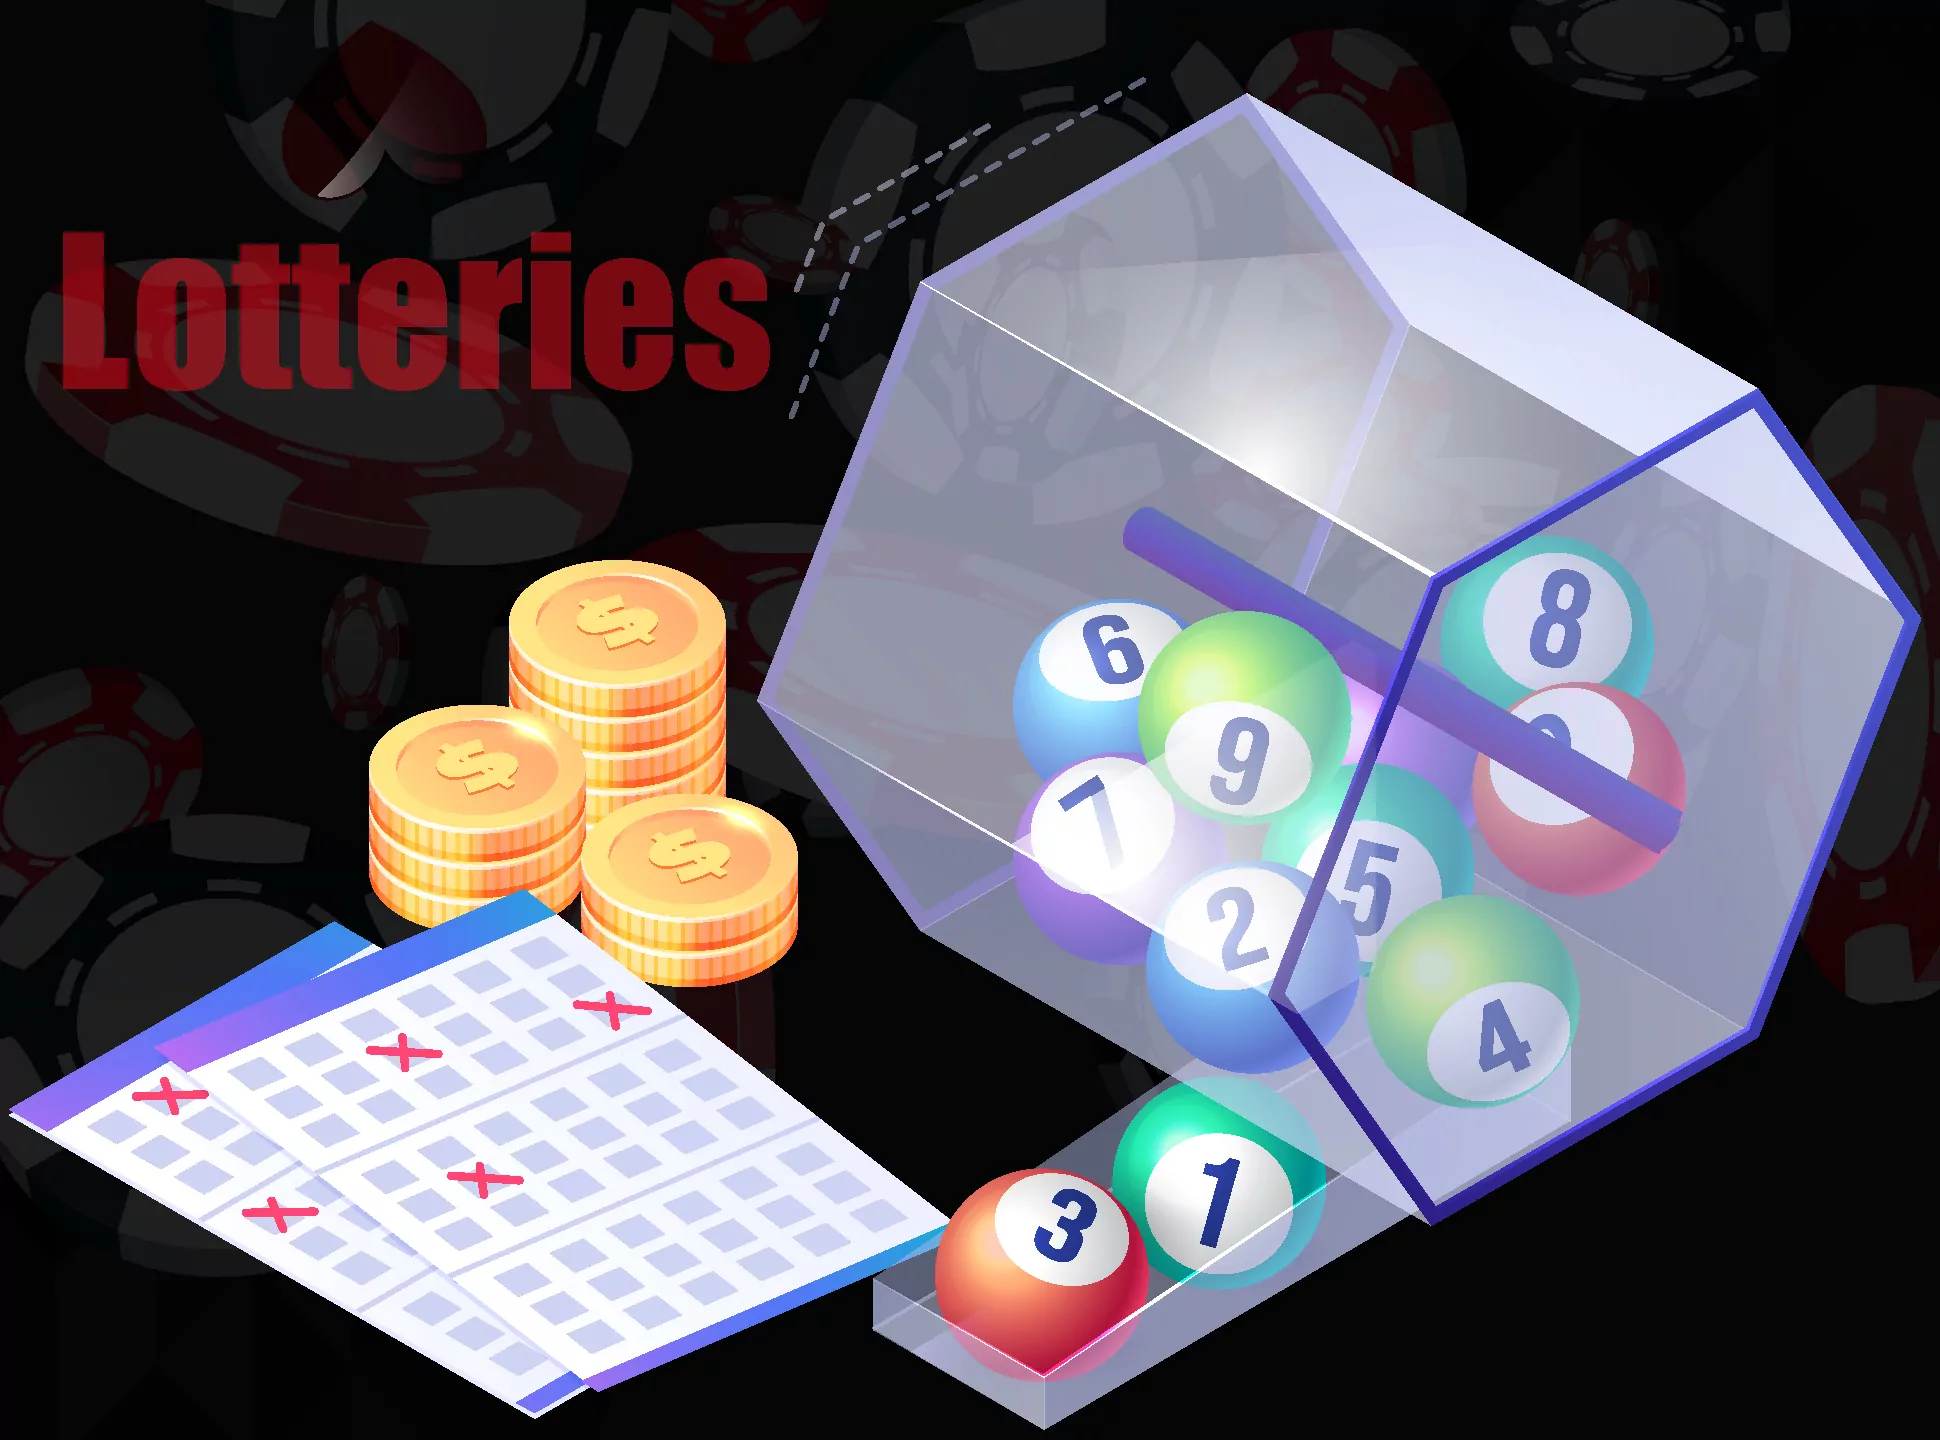 Test your luck and play lottery games in online casinos.